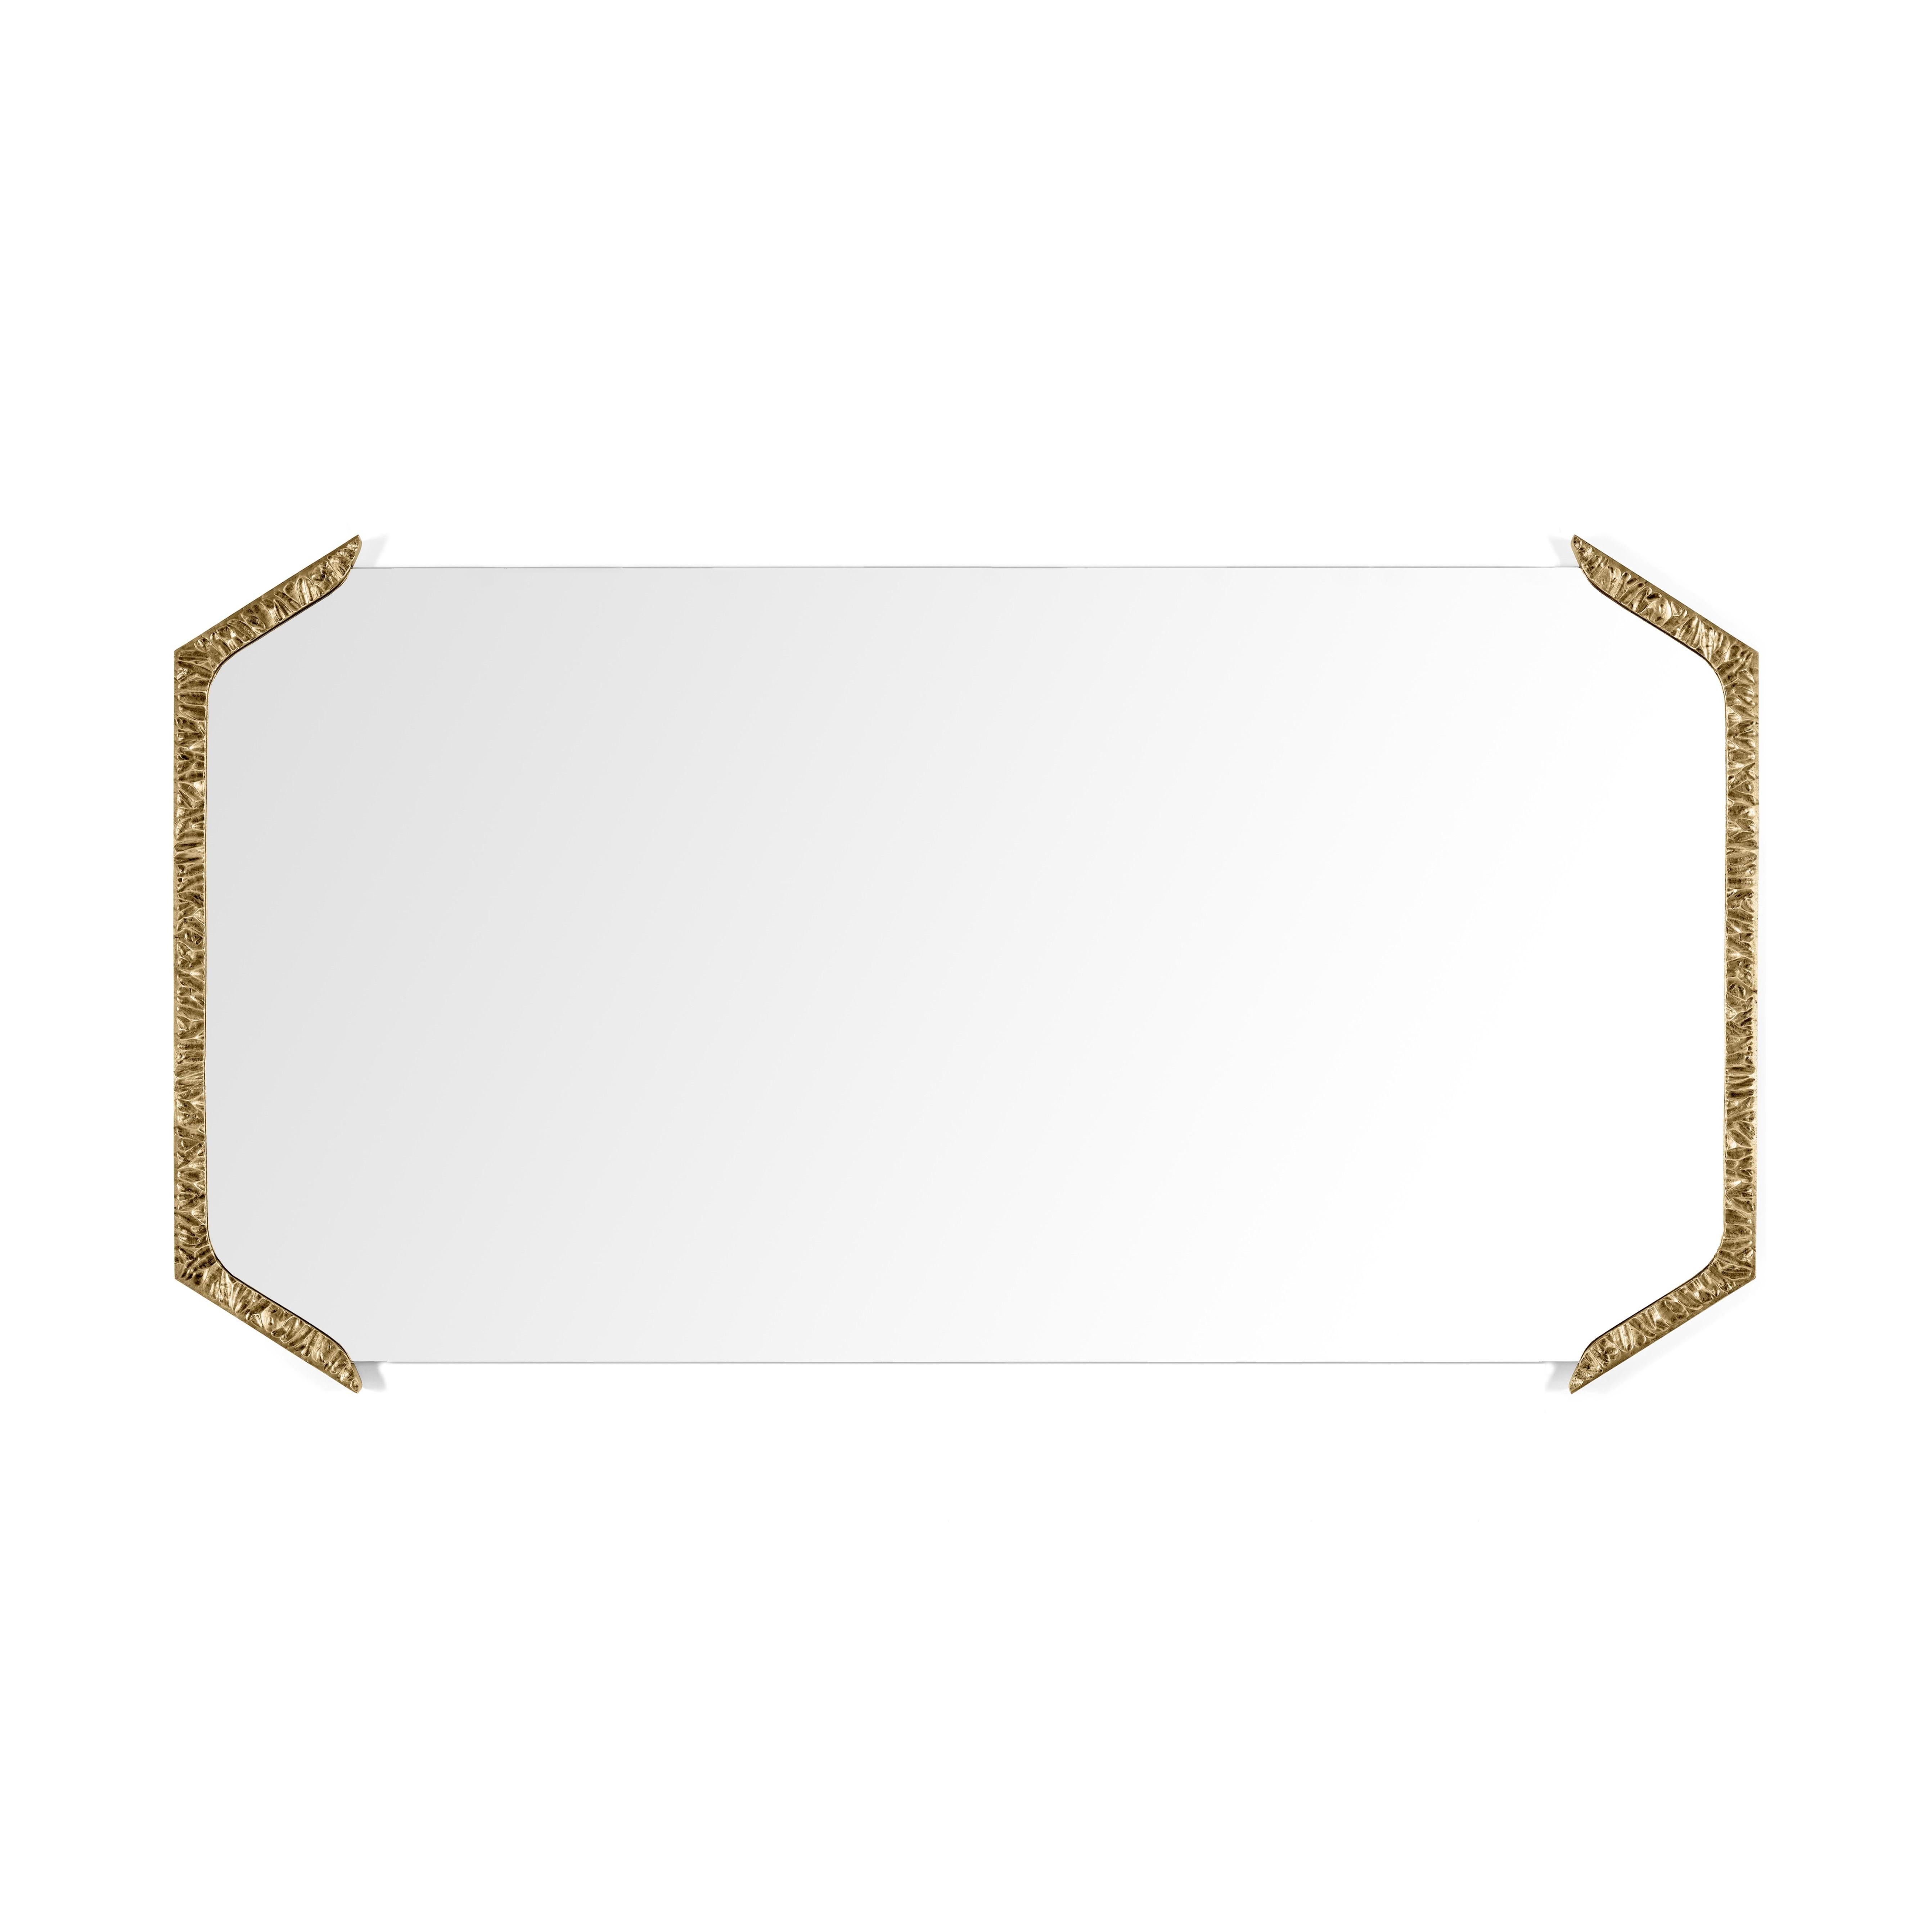 Alentejo rectangular mirror is a glimpse over the South of Portugal where thousands of cork oaks trees raise their canopies to the sky.
Resembling the typical structure of these trees, this luxury mirror is embraced by two grand tree trunks which